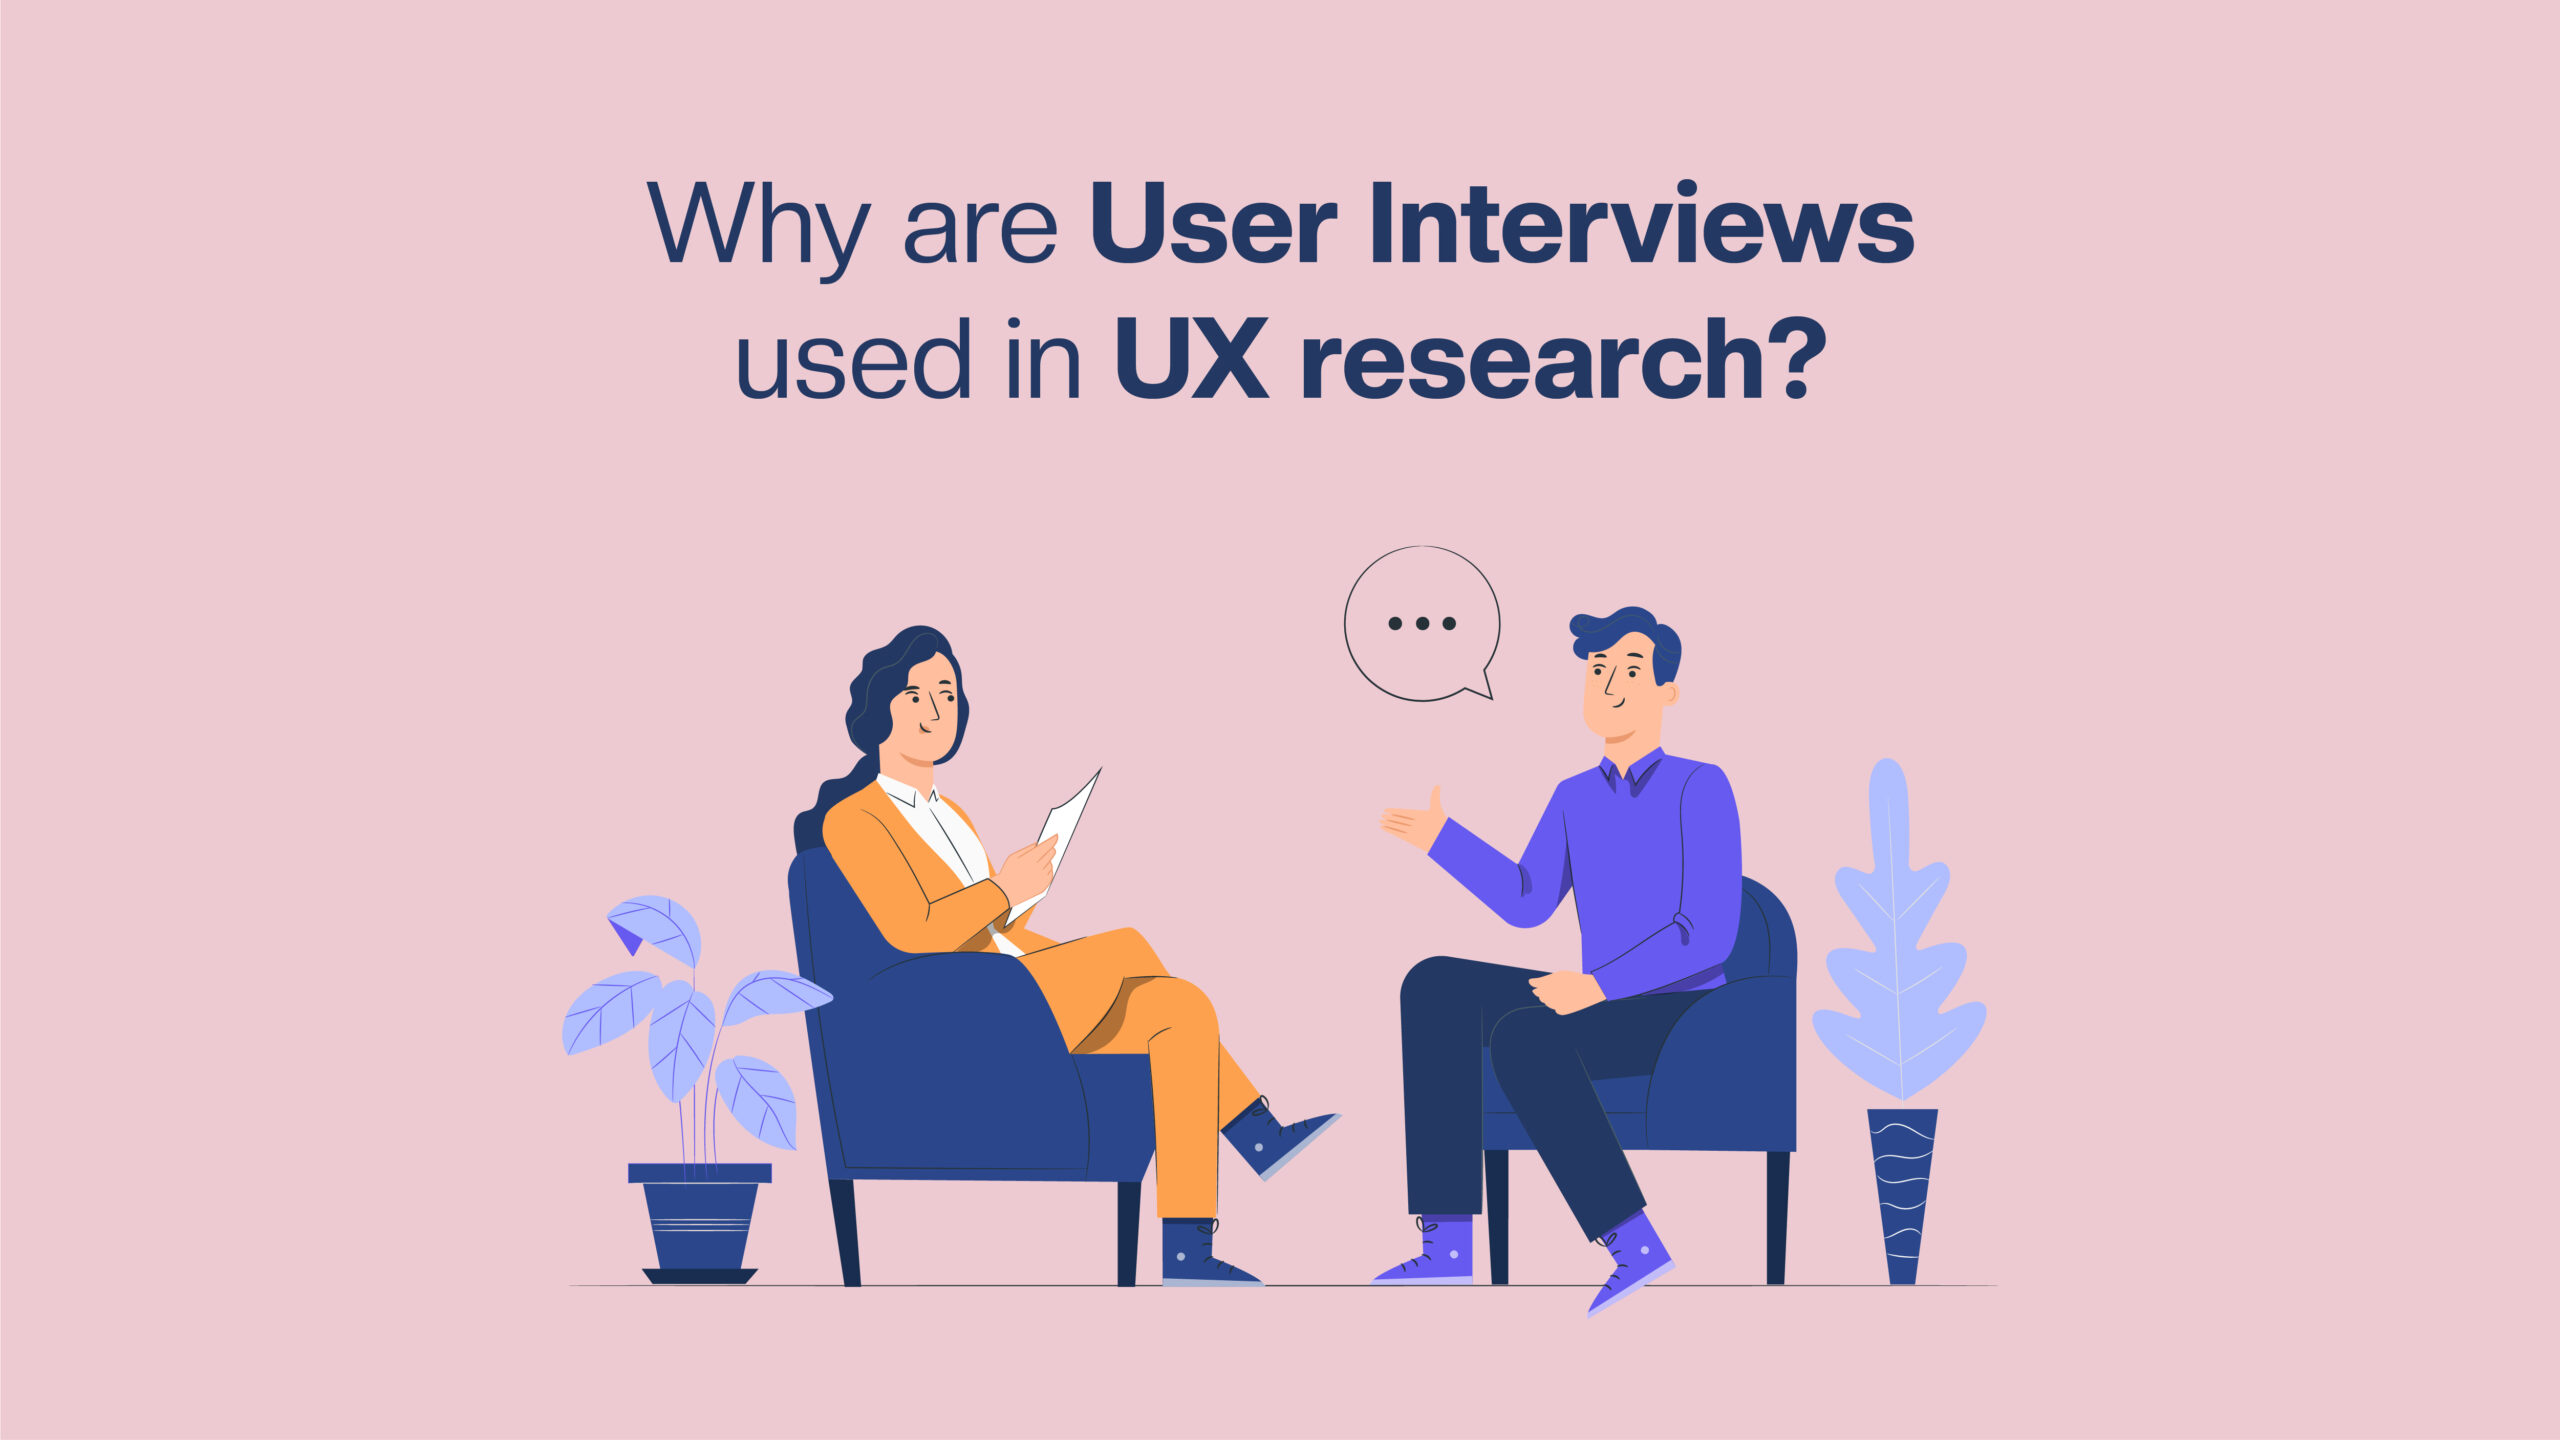 Why are user interviews used in UX research